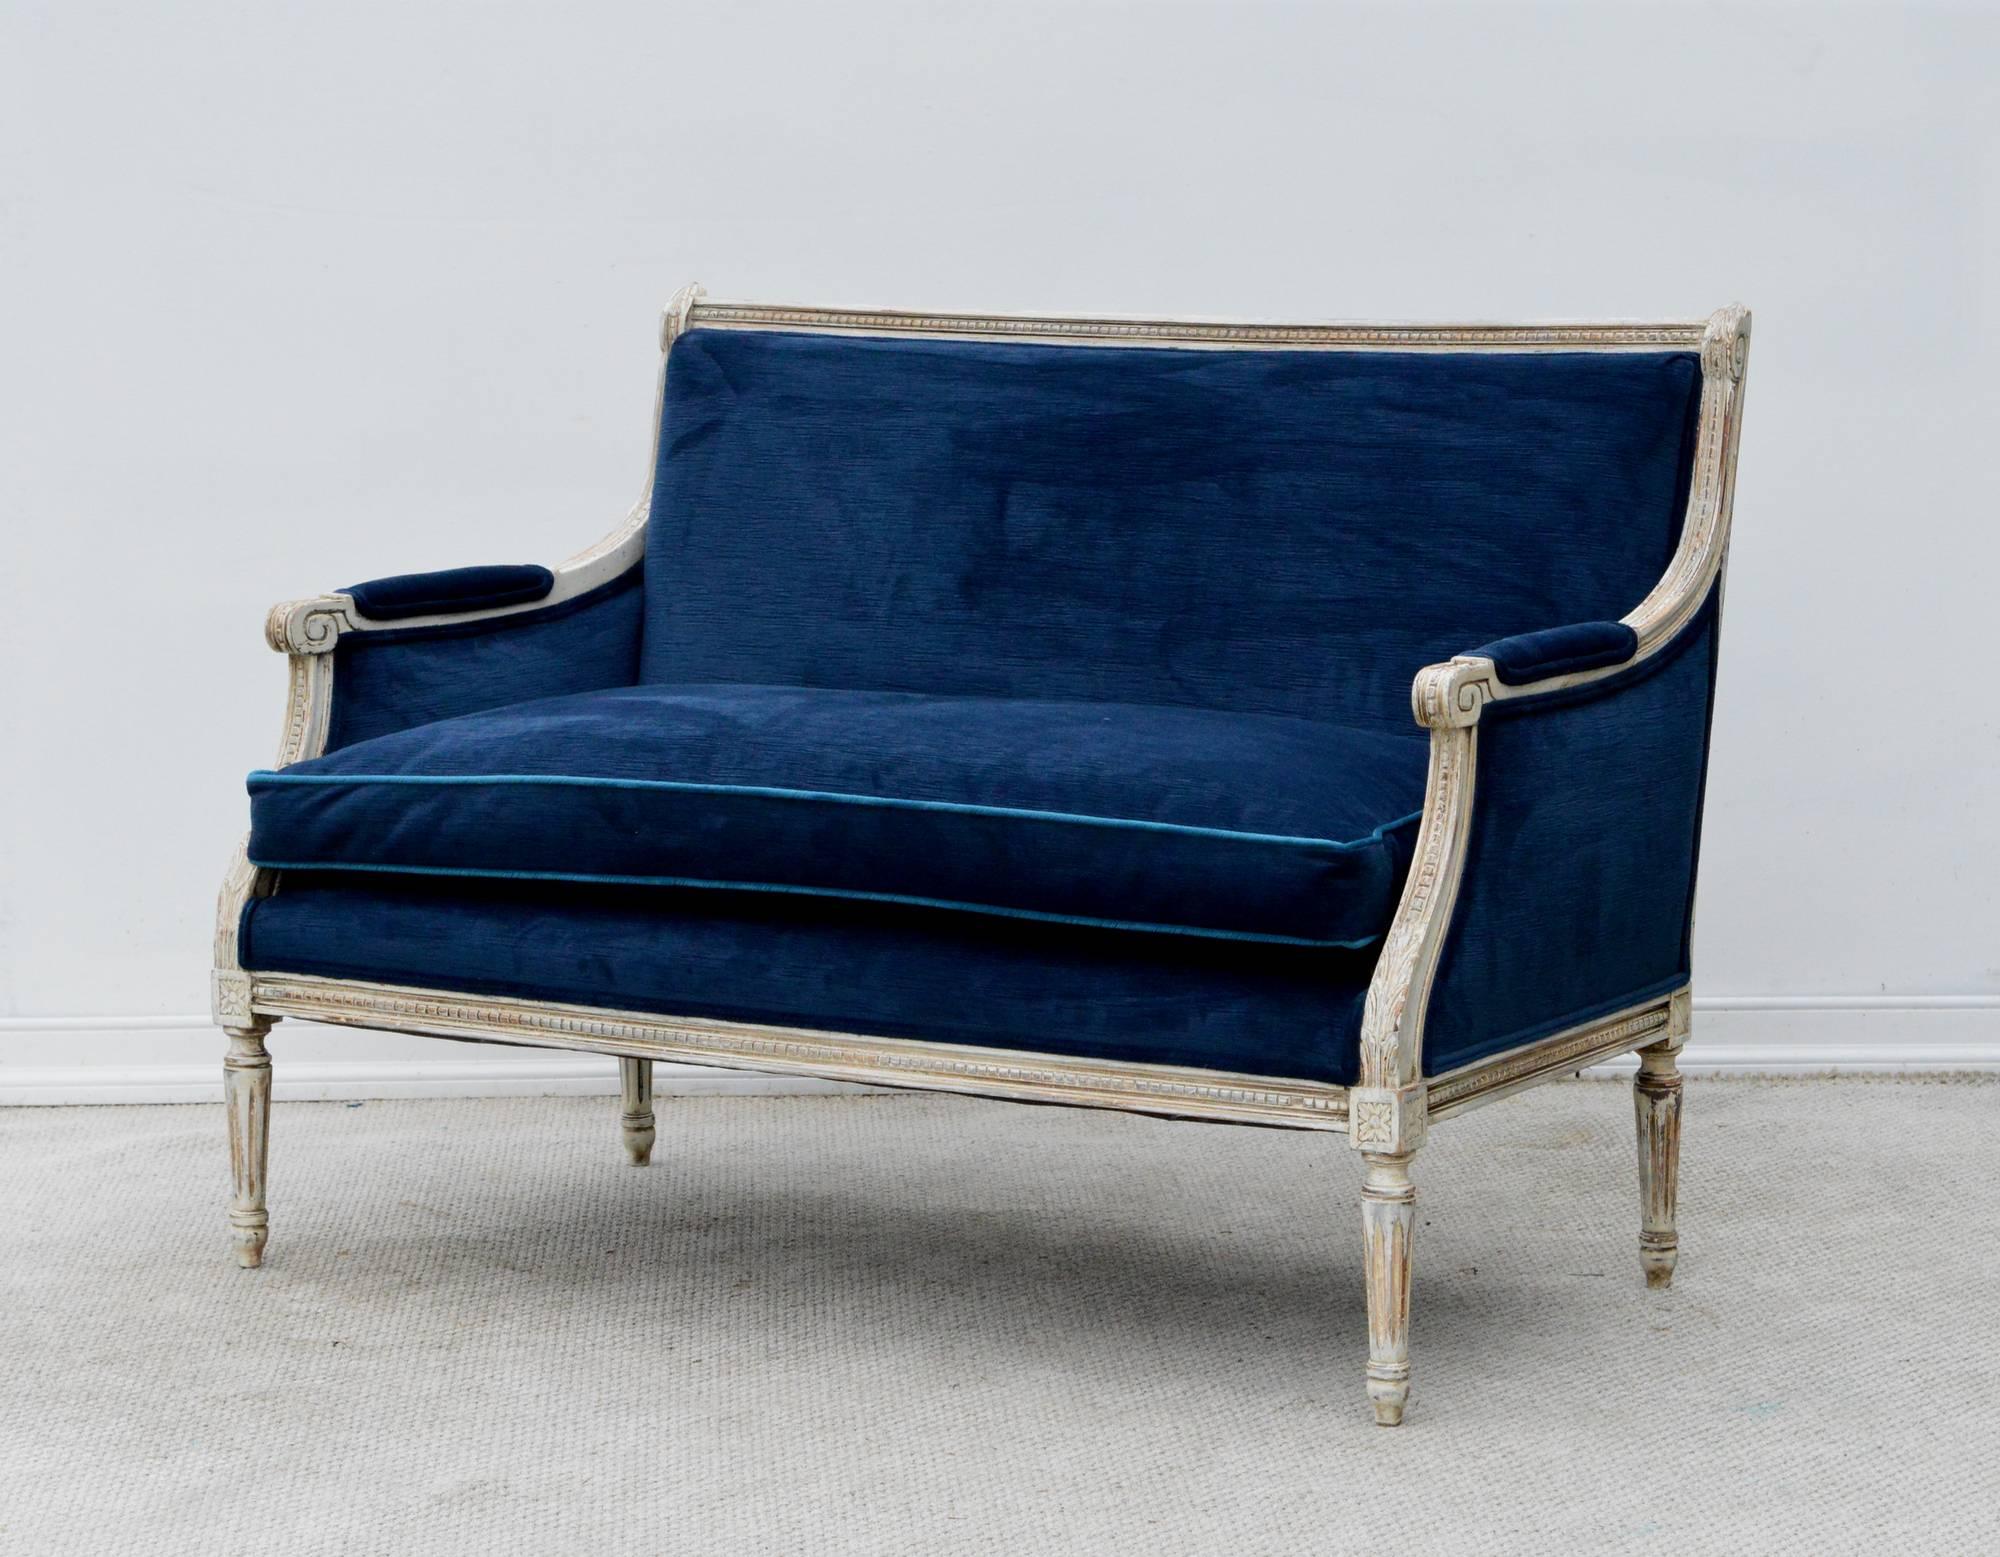 20th Century French Settee in Coastal Chic Blue Velvet For Sale